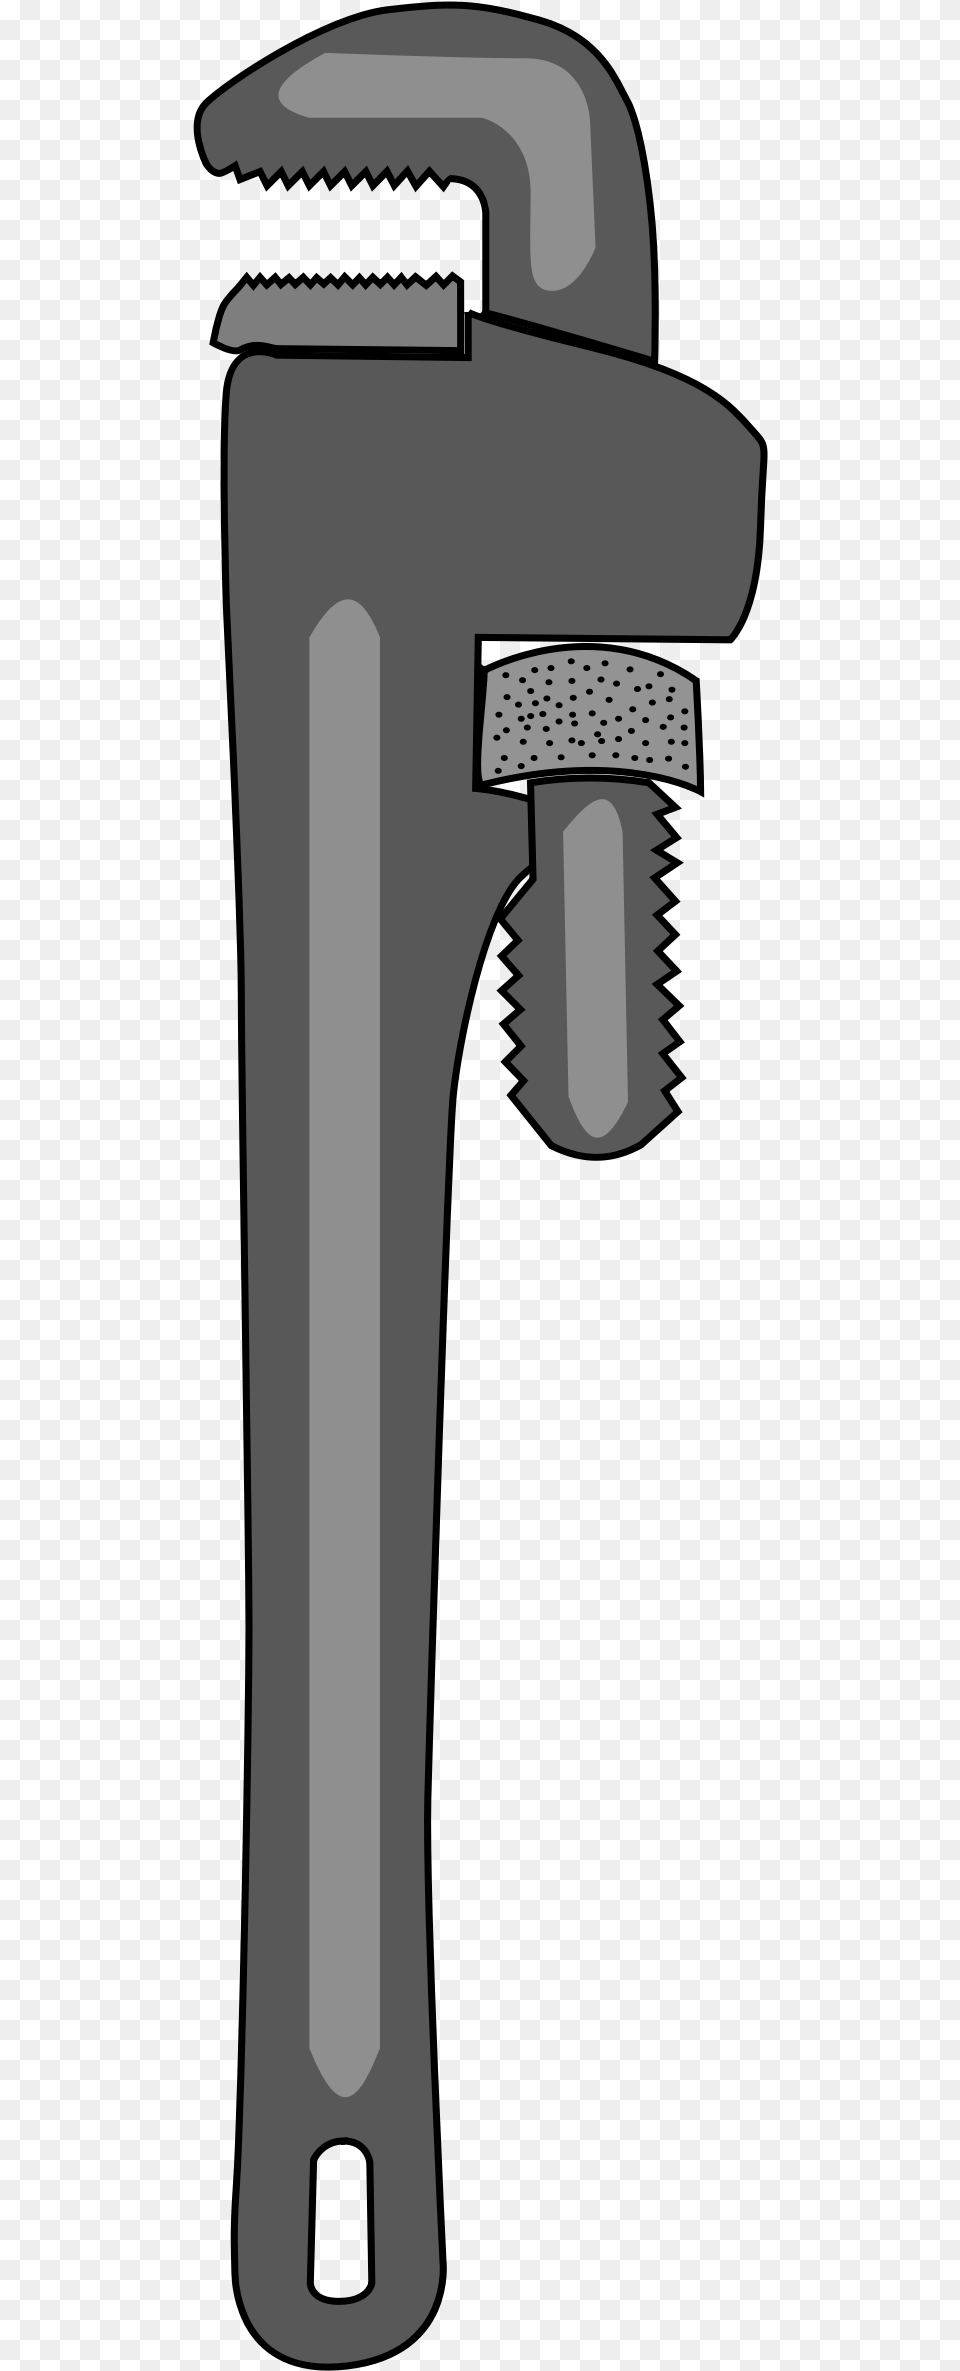 Wrench Clipart Pipe Wrench Clip Art Free Png